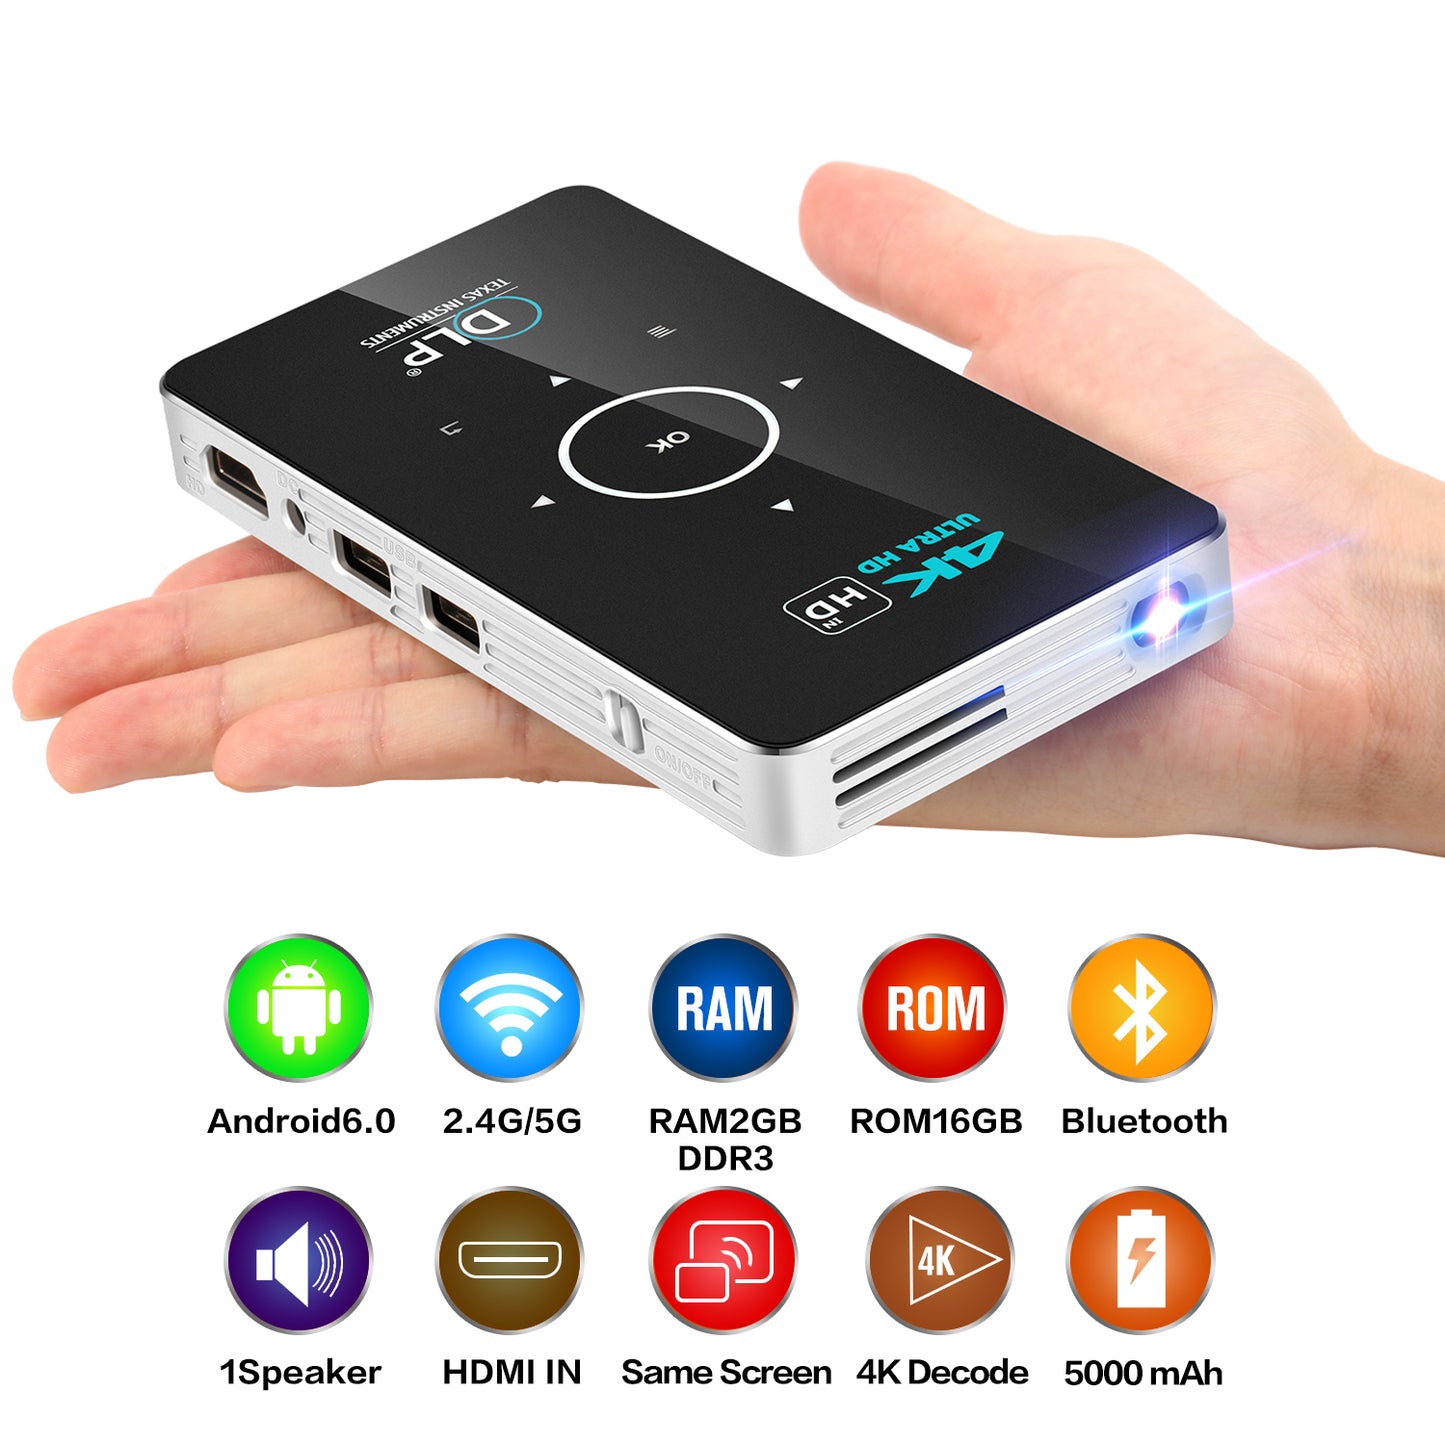 Indoor & Outdoor wireless Projector, WiFi Bluetooth 4.0 Portable LED